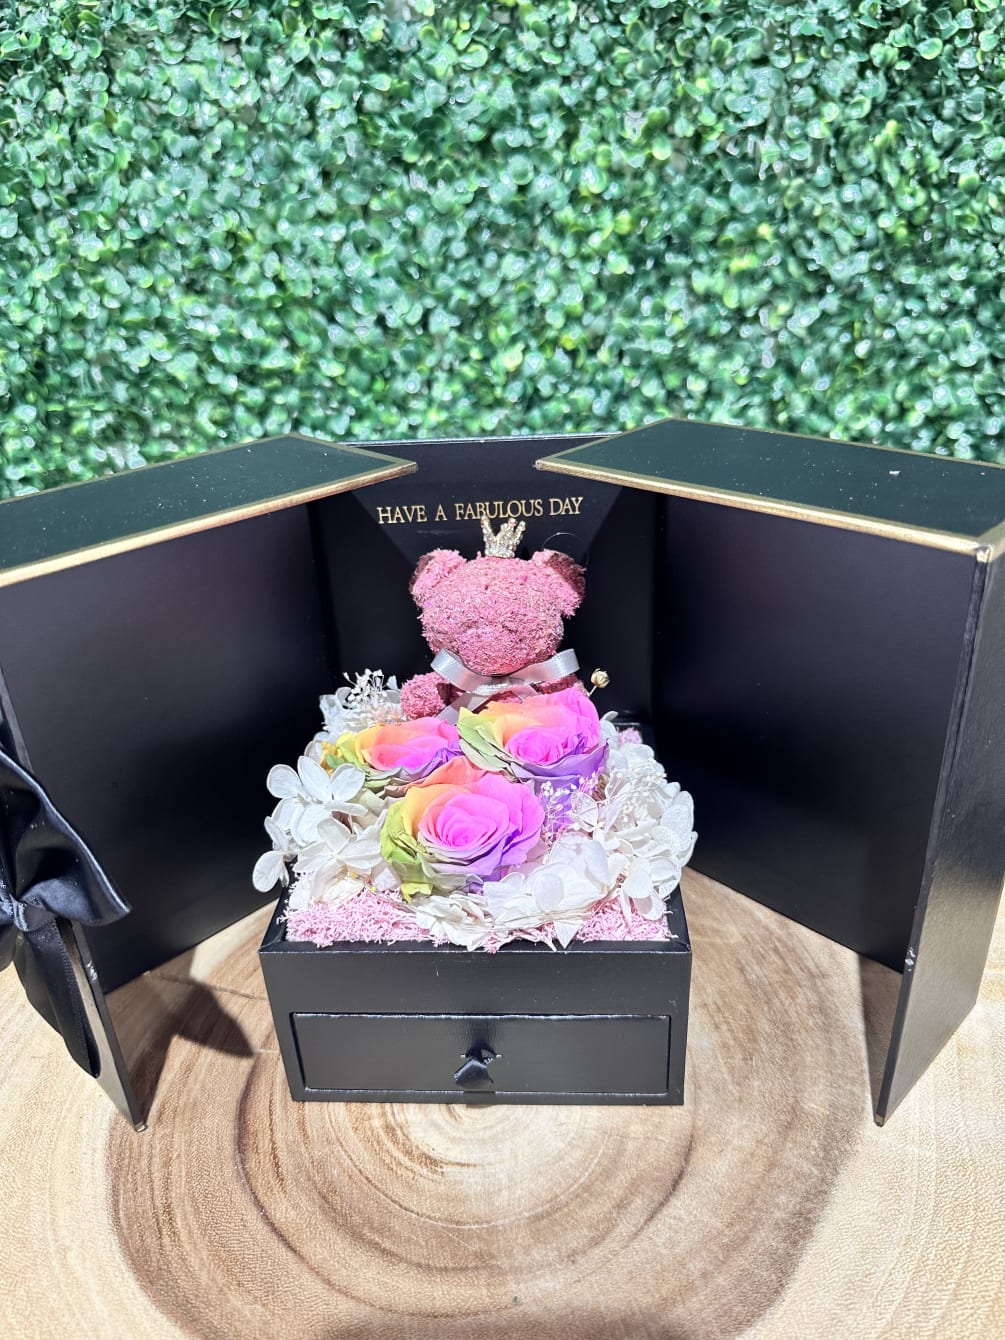 Preserved Pastel Roses with a Moss Teddy Bear
Includes a necklace 